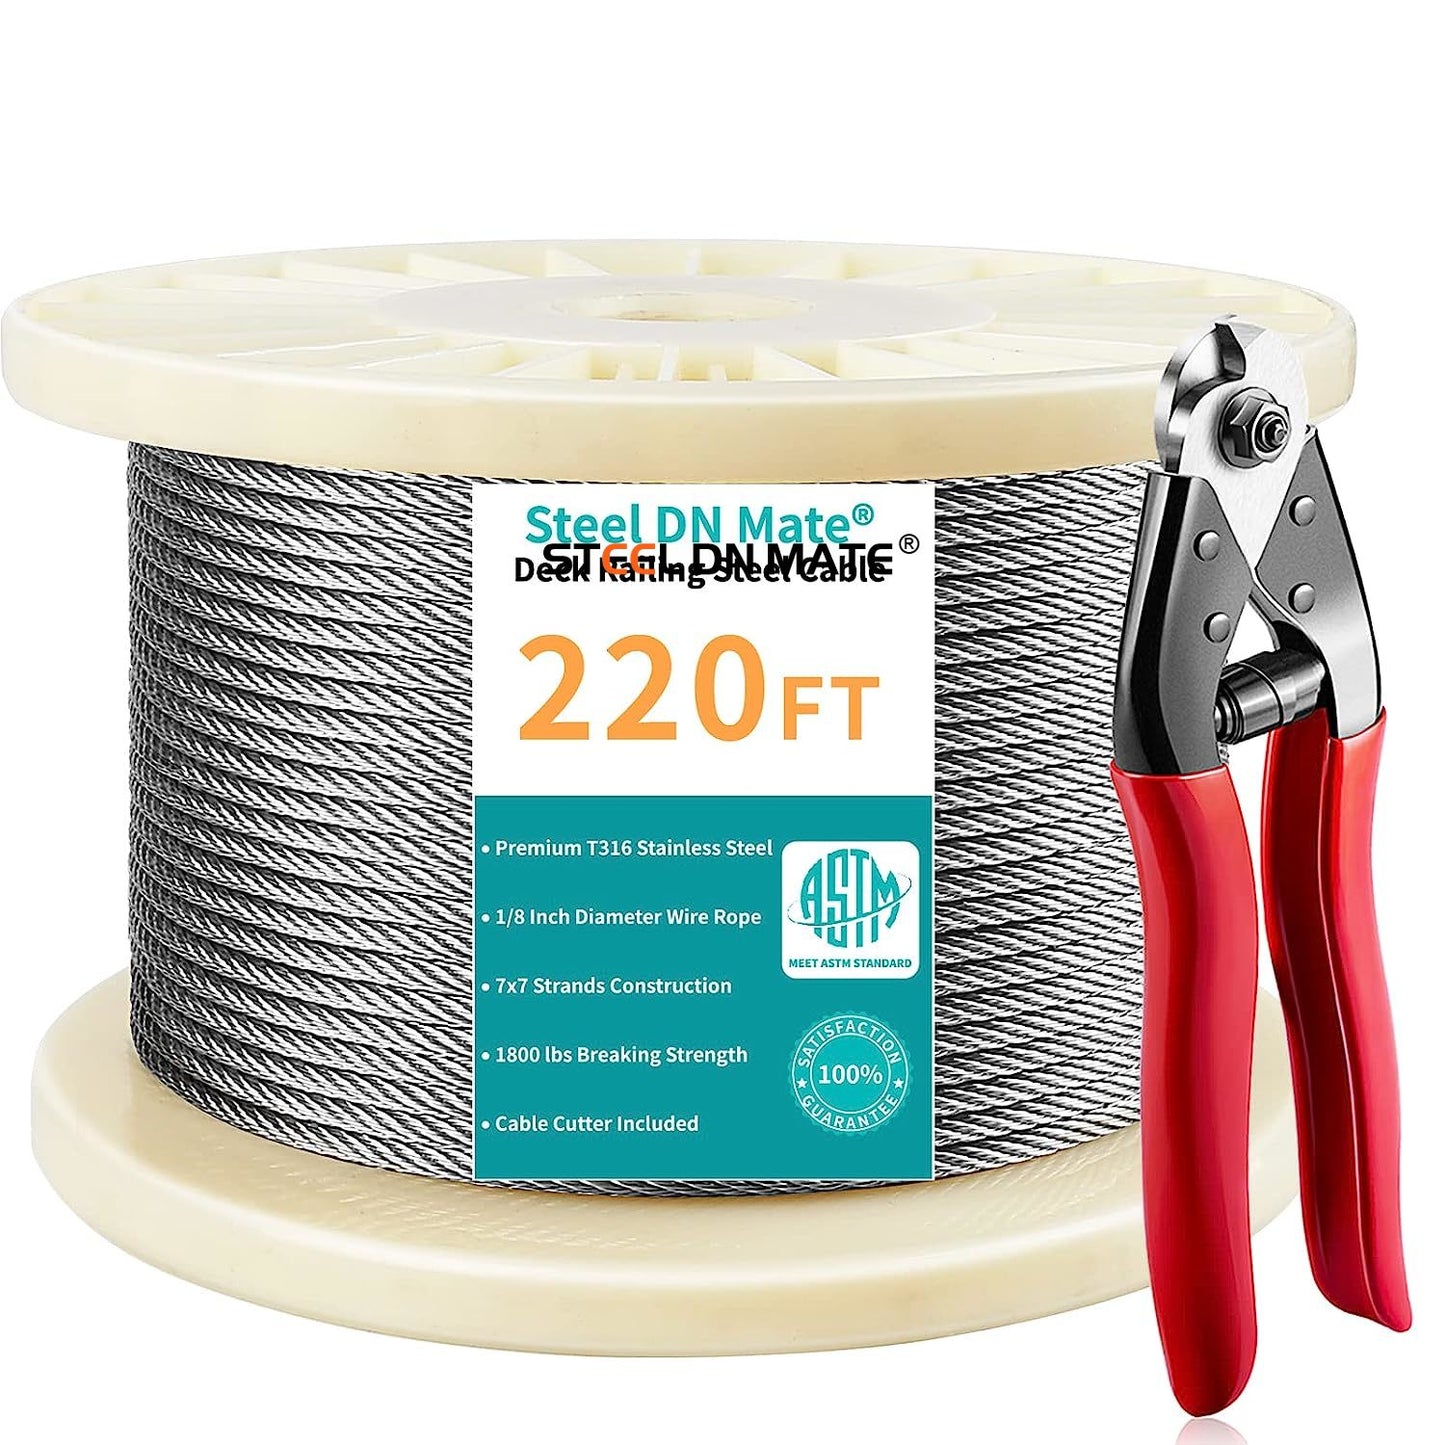 Steel DN Mate1/8 Stainless Steel Cable for Steel Cable Railing Kit, T316 Stainless Steel Wire, 1800 lb Breaking Strength, 7x7 Strands Construction Cable Railing System, Marine Grade Wire